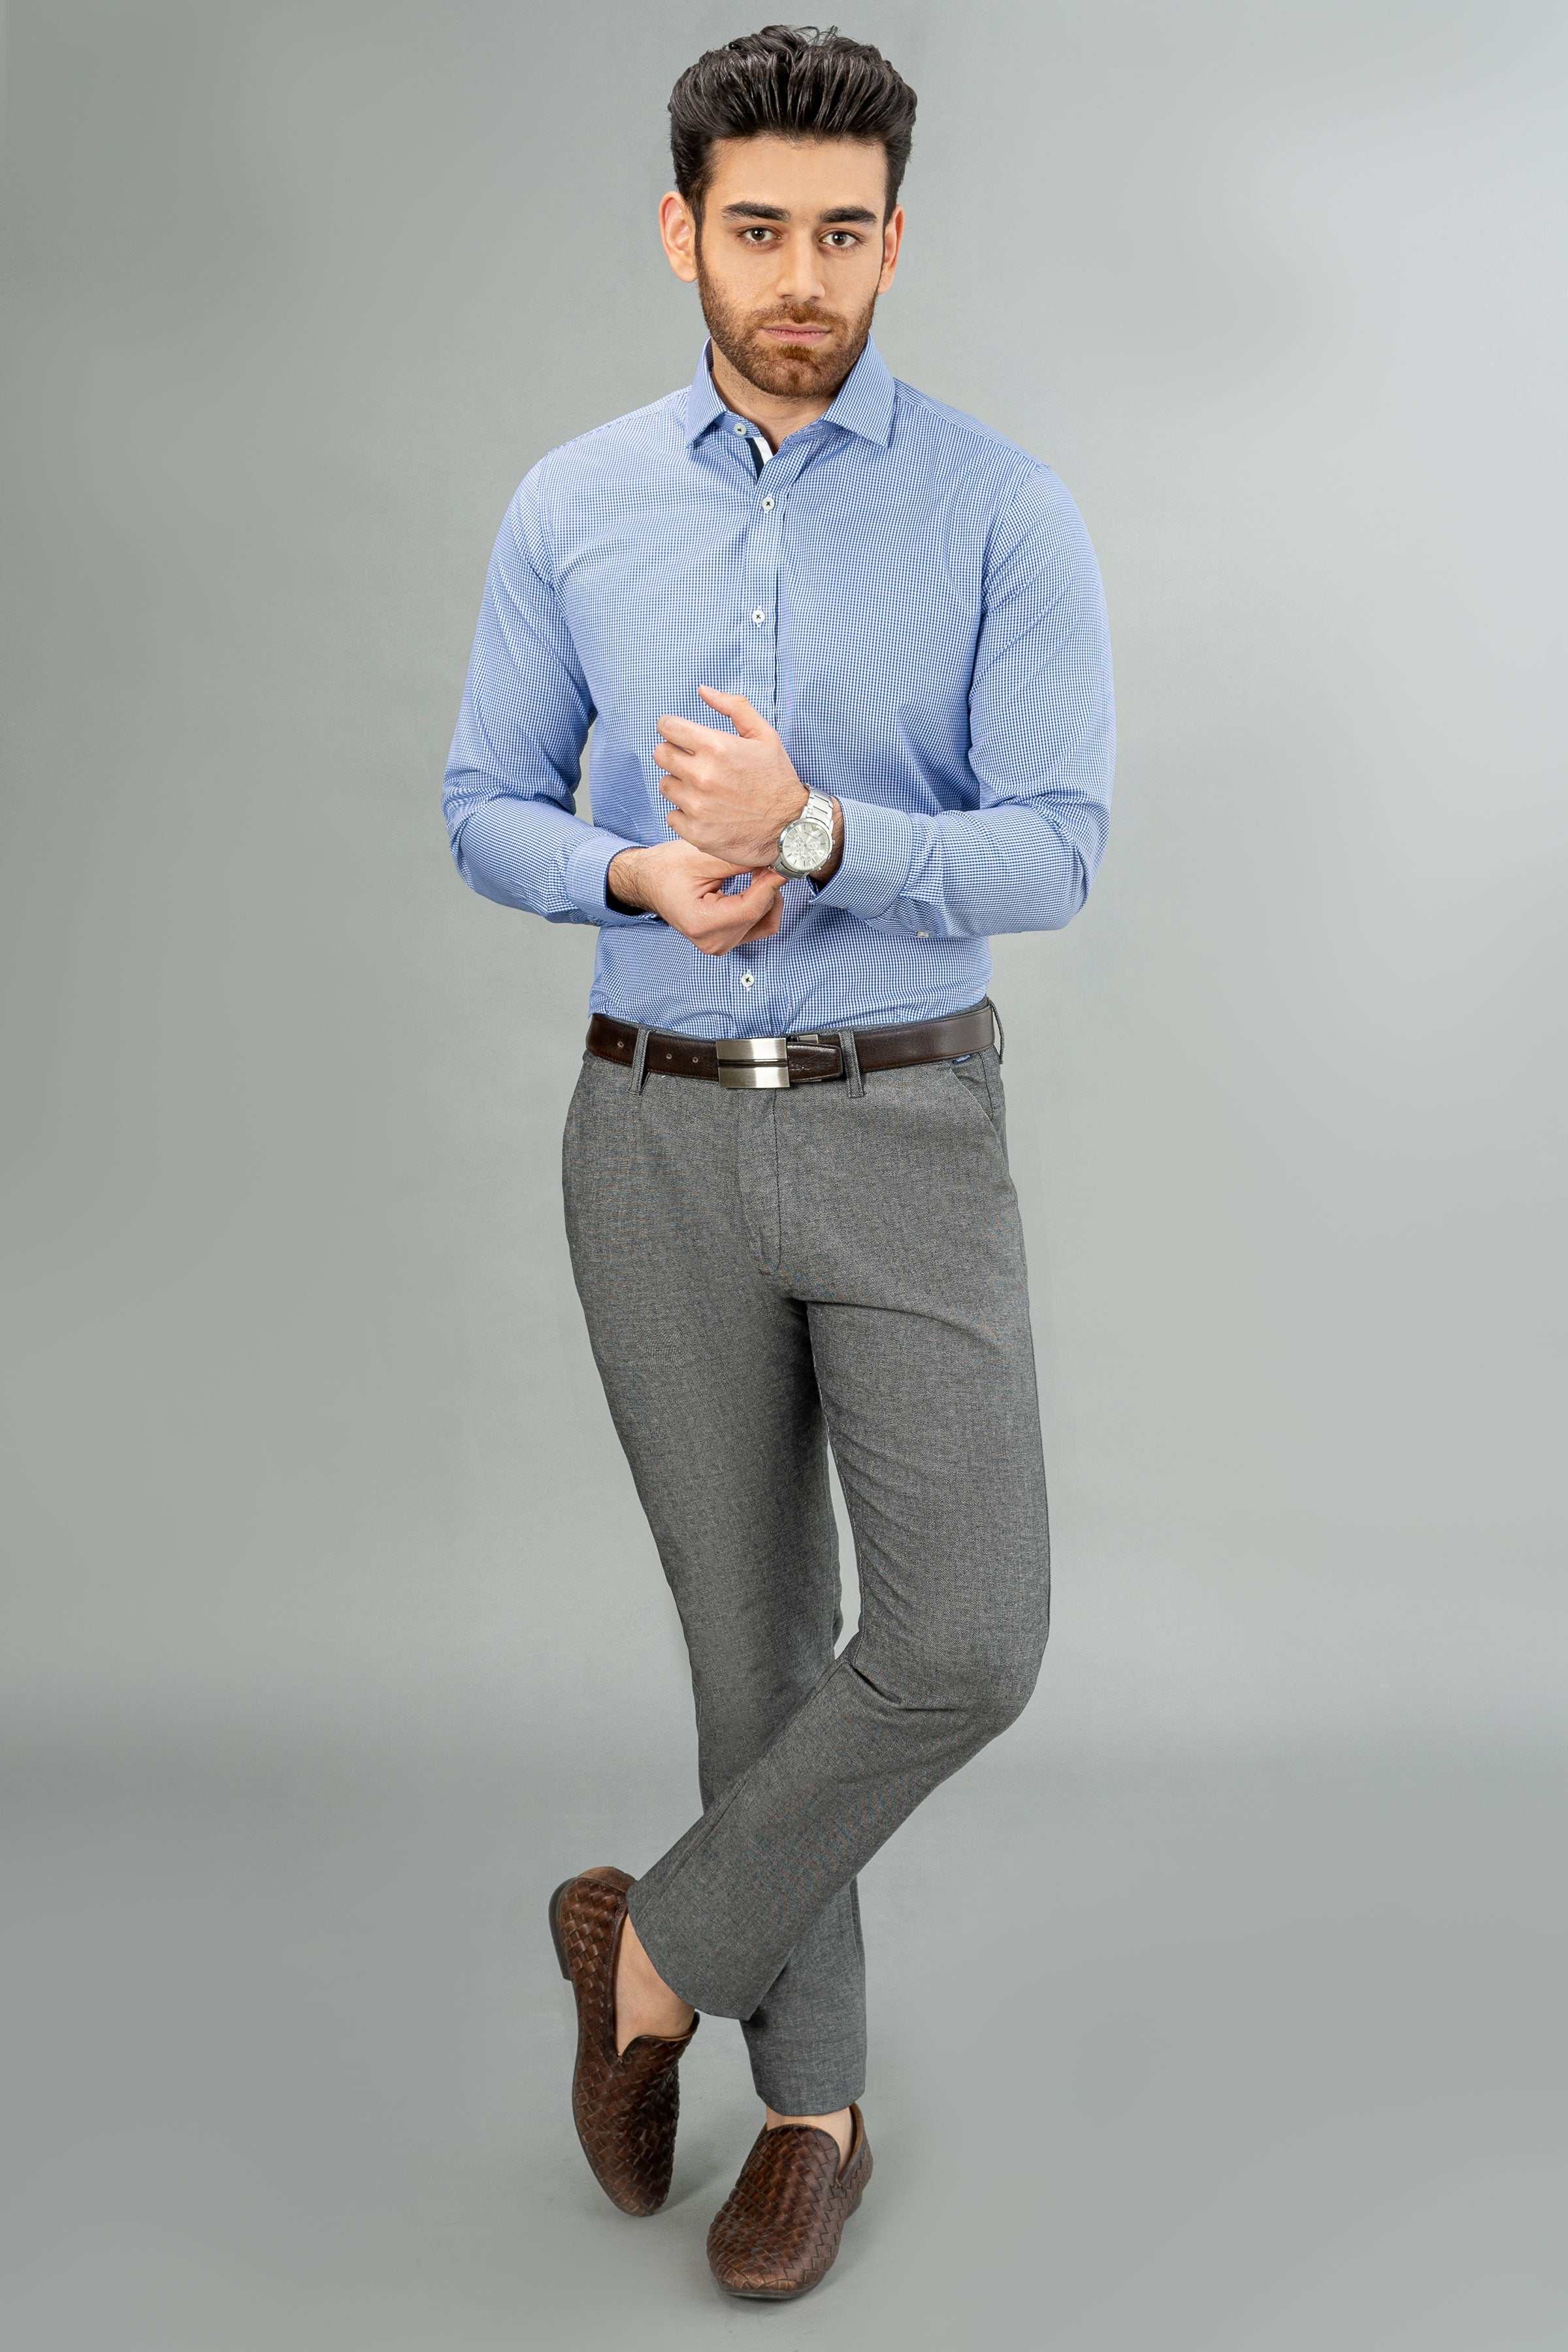 SEMI FORMAL BLUE WHITE at Charcoal Clothing